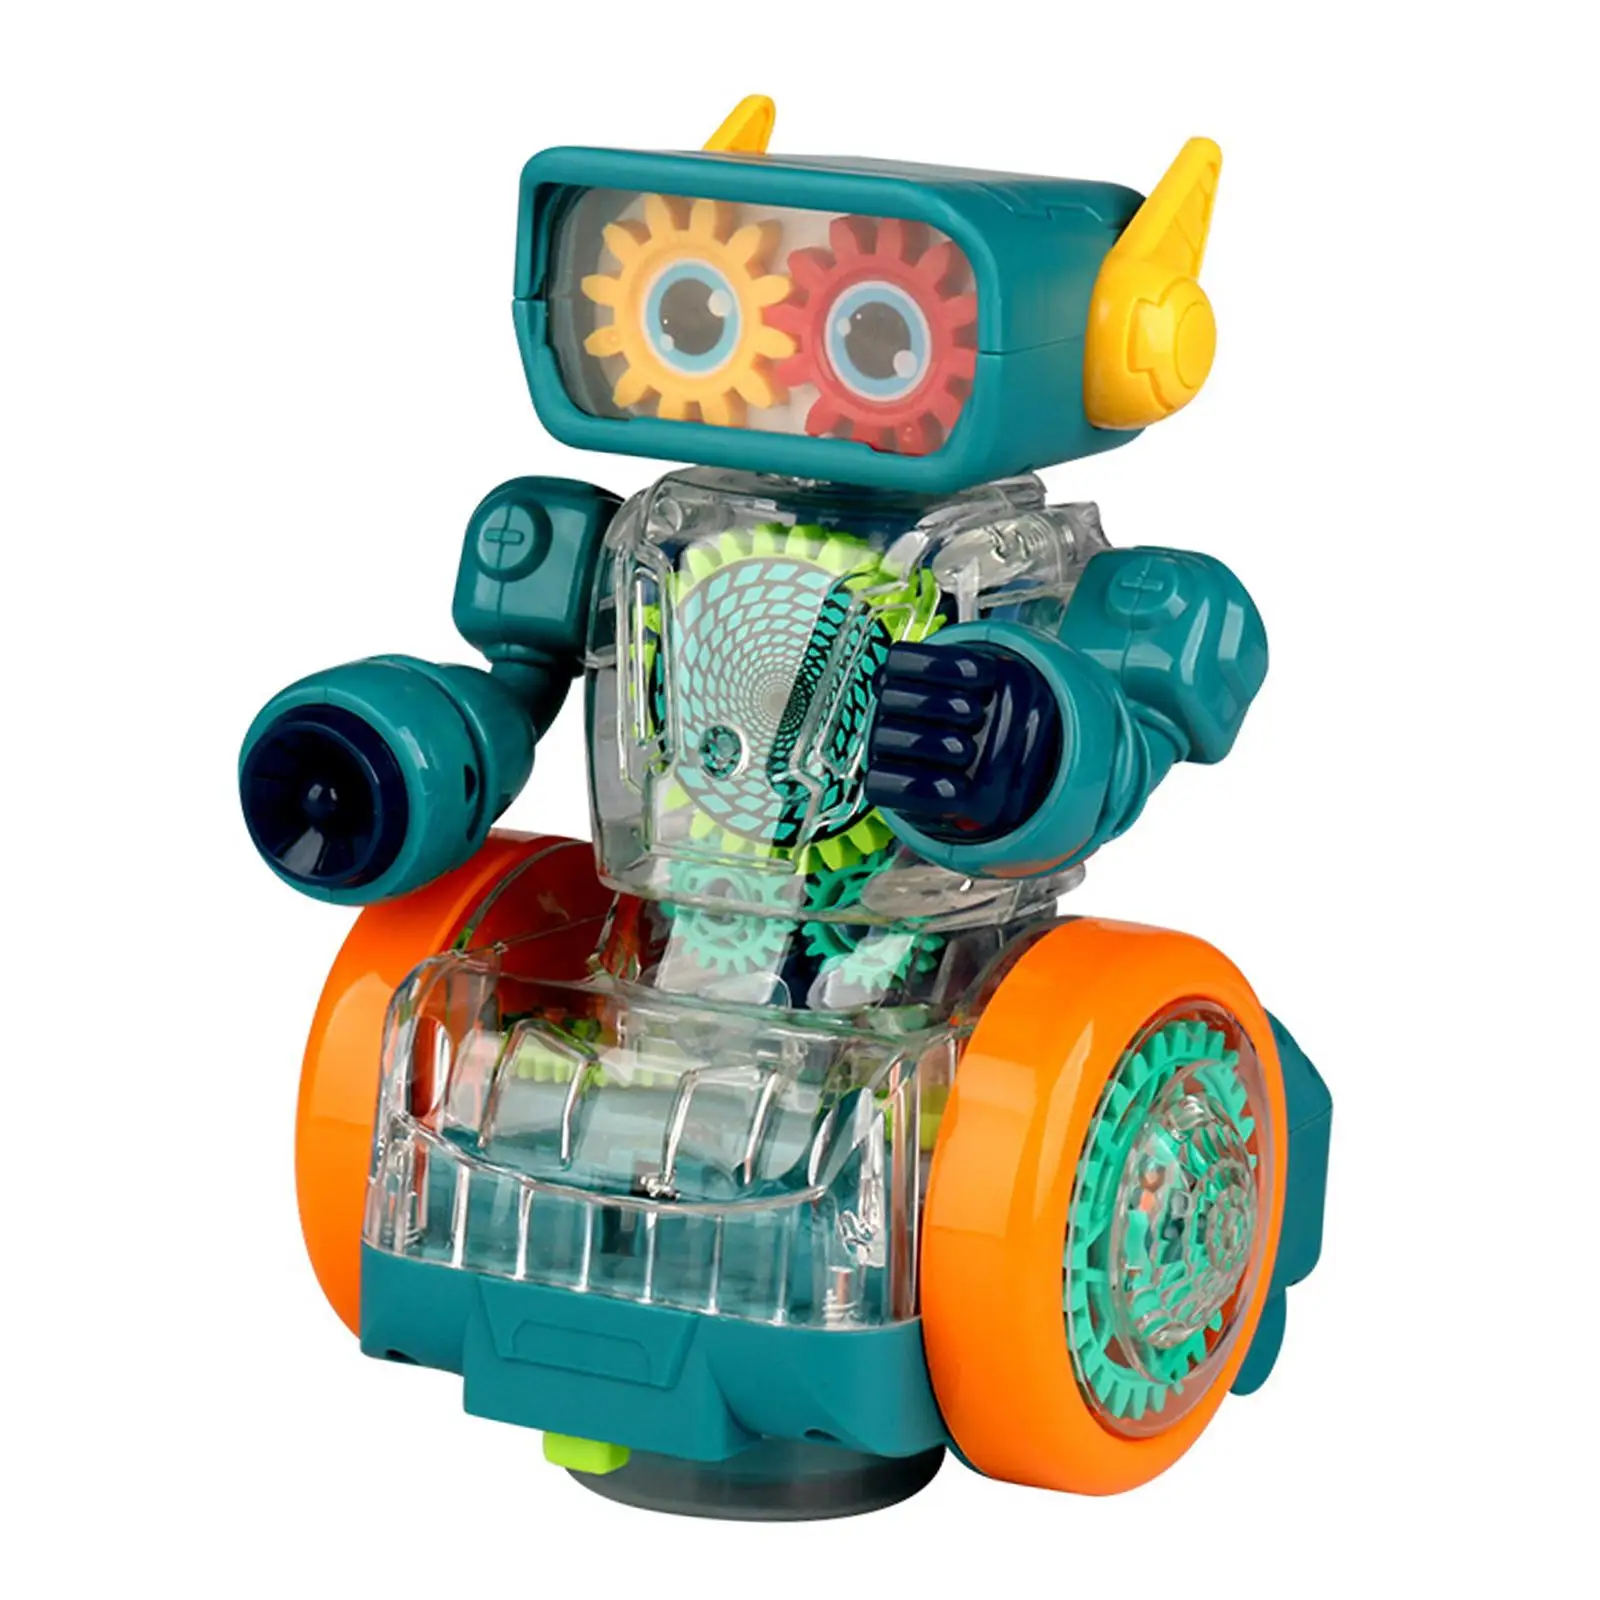 Mechanical Gear Robot Toy Fine Motor Skills with Lighting Developmental Toys Early Educational Toys for Boys Kids Holiday Gifts